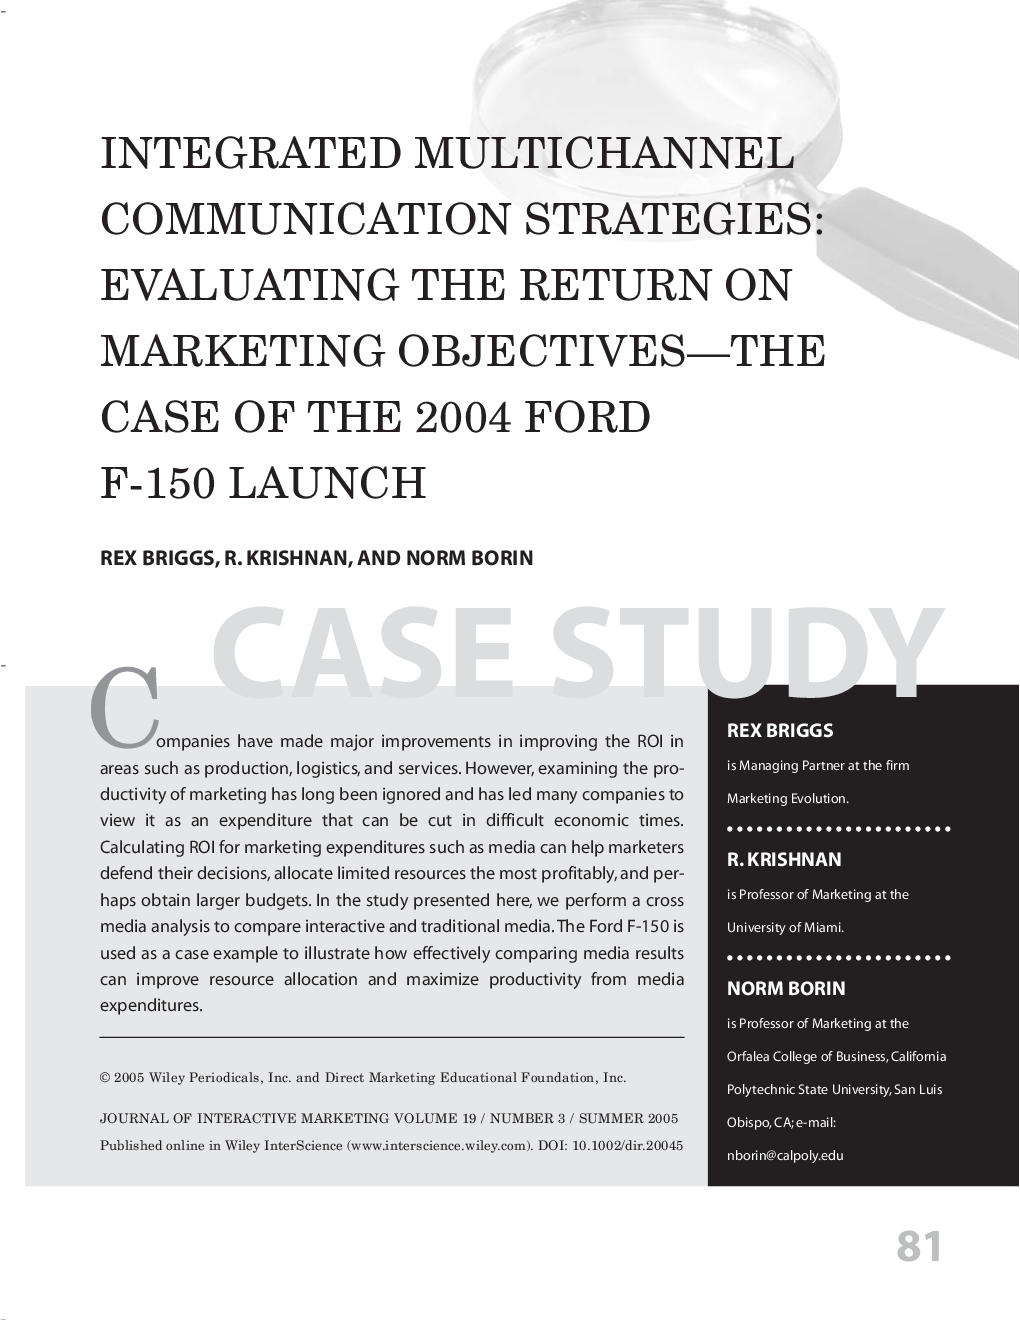 Integrated multichannel communication strategies: Evaluating the return on marketing objectives--the case of the 2004 Ford F-150 launch